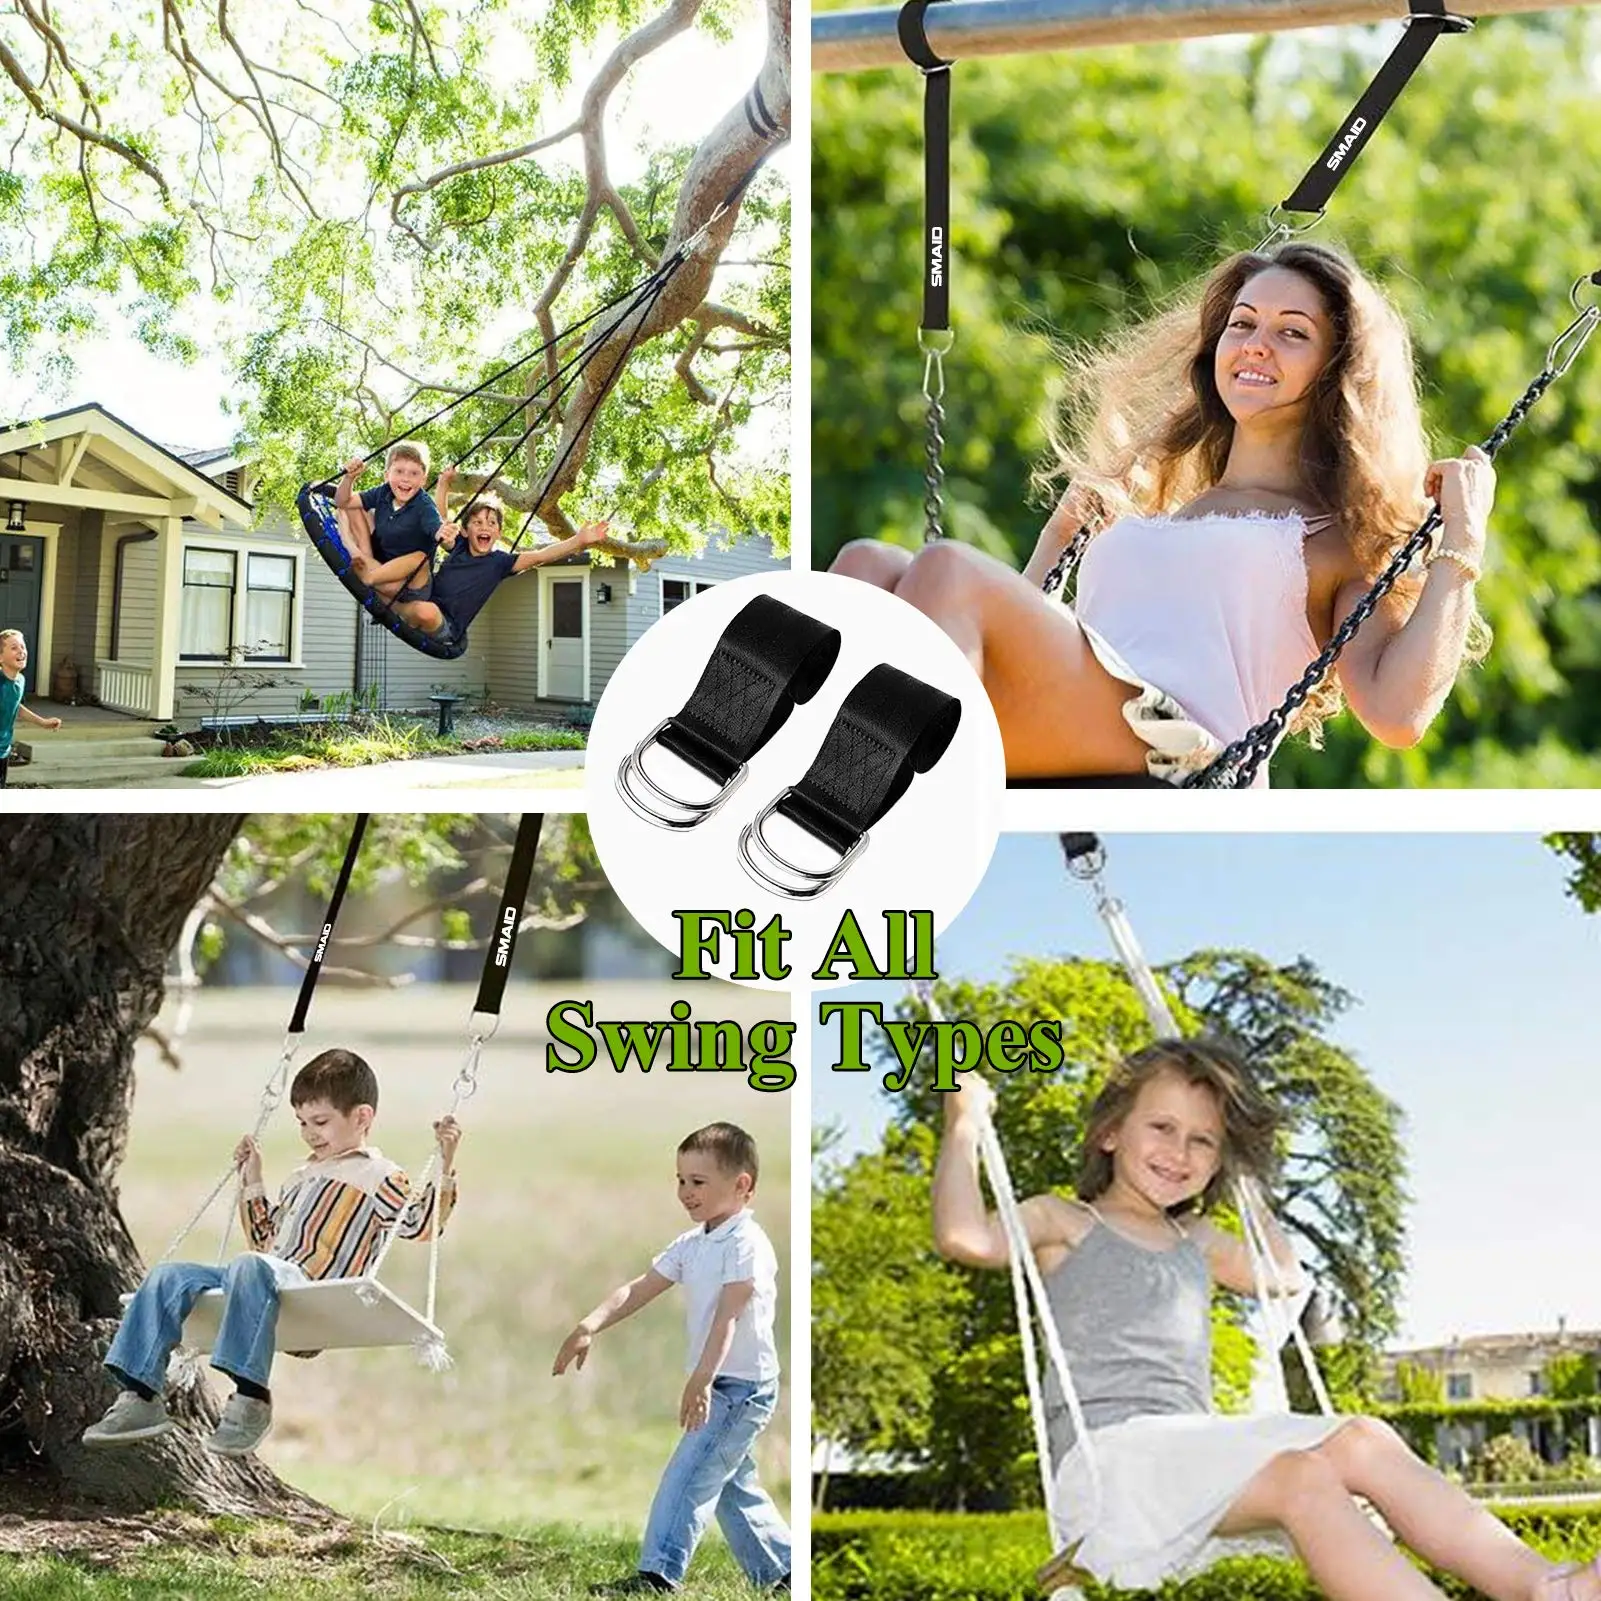 150x5cm Tree Swing Hanging Straps Kit Holds 2000lb With 2 Heavy Duty Carabiner Perfect for Swings Hammock Easy Fast Installation